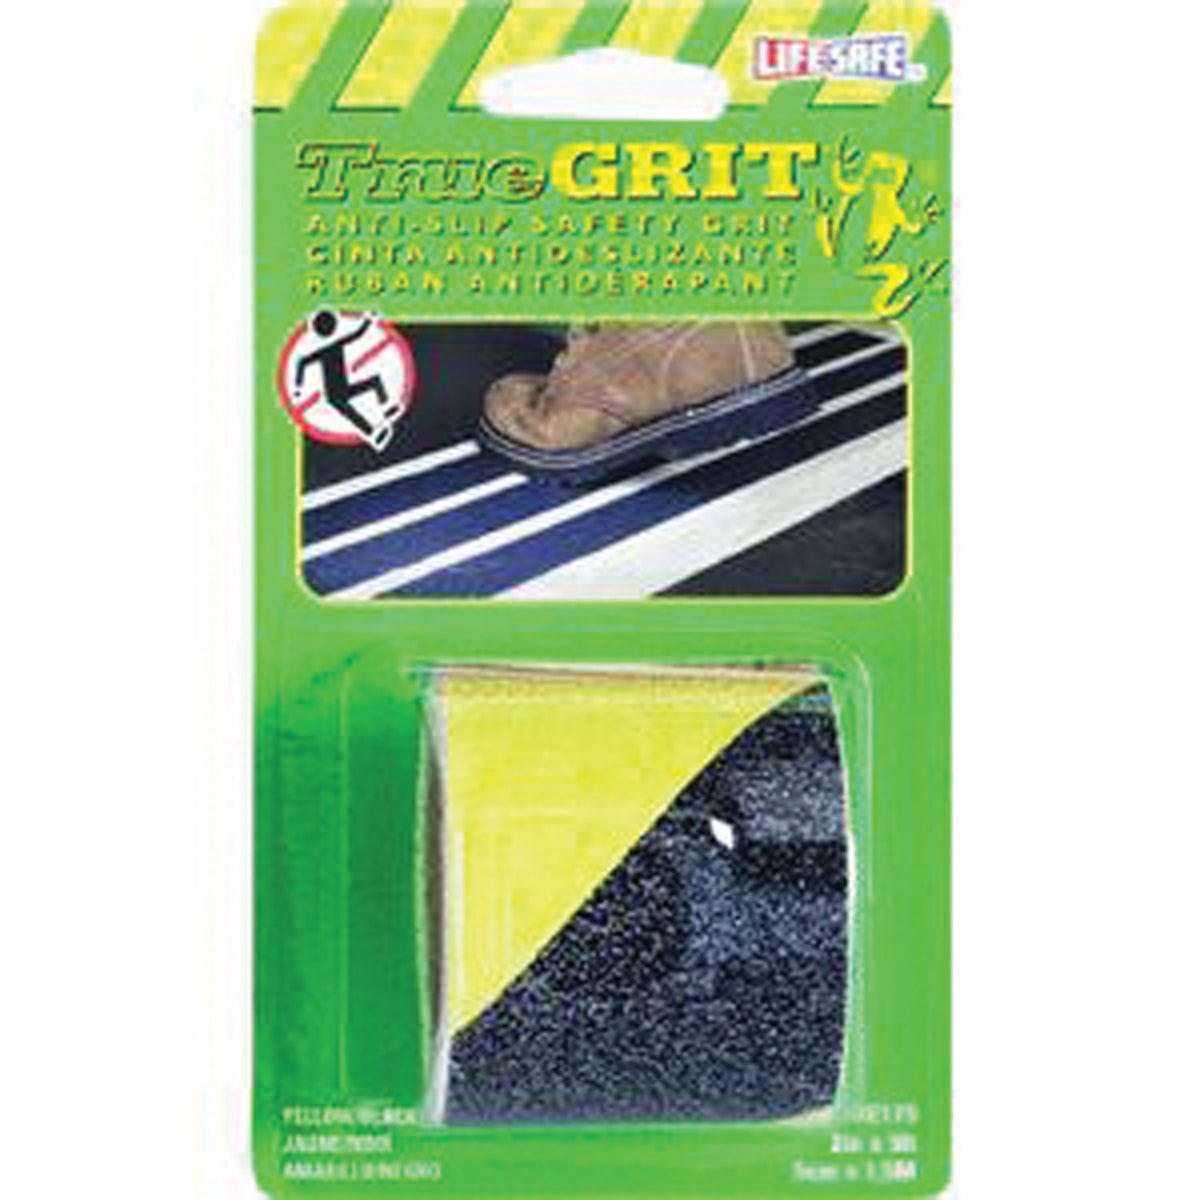 Life Safe RE175 Anti-Slip Safety Grip Tape - 2 in. x 5 in., Yellow/Black